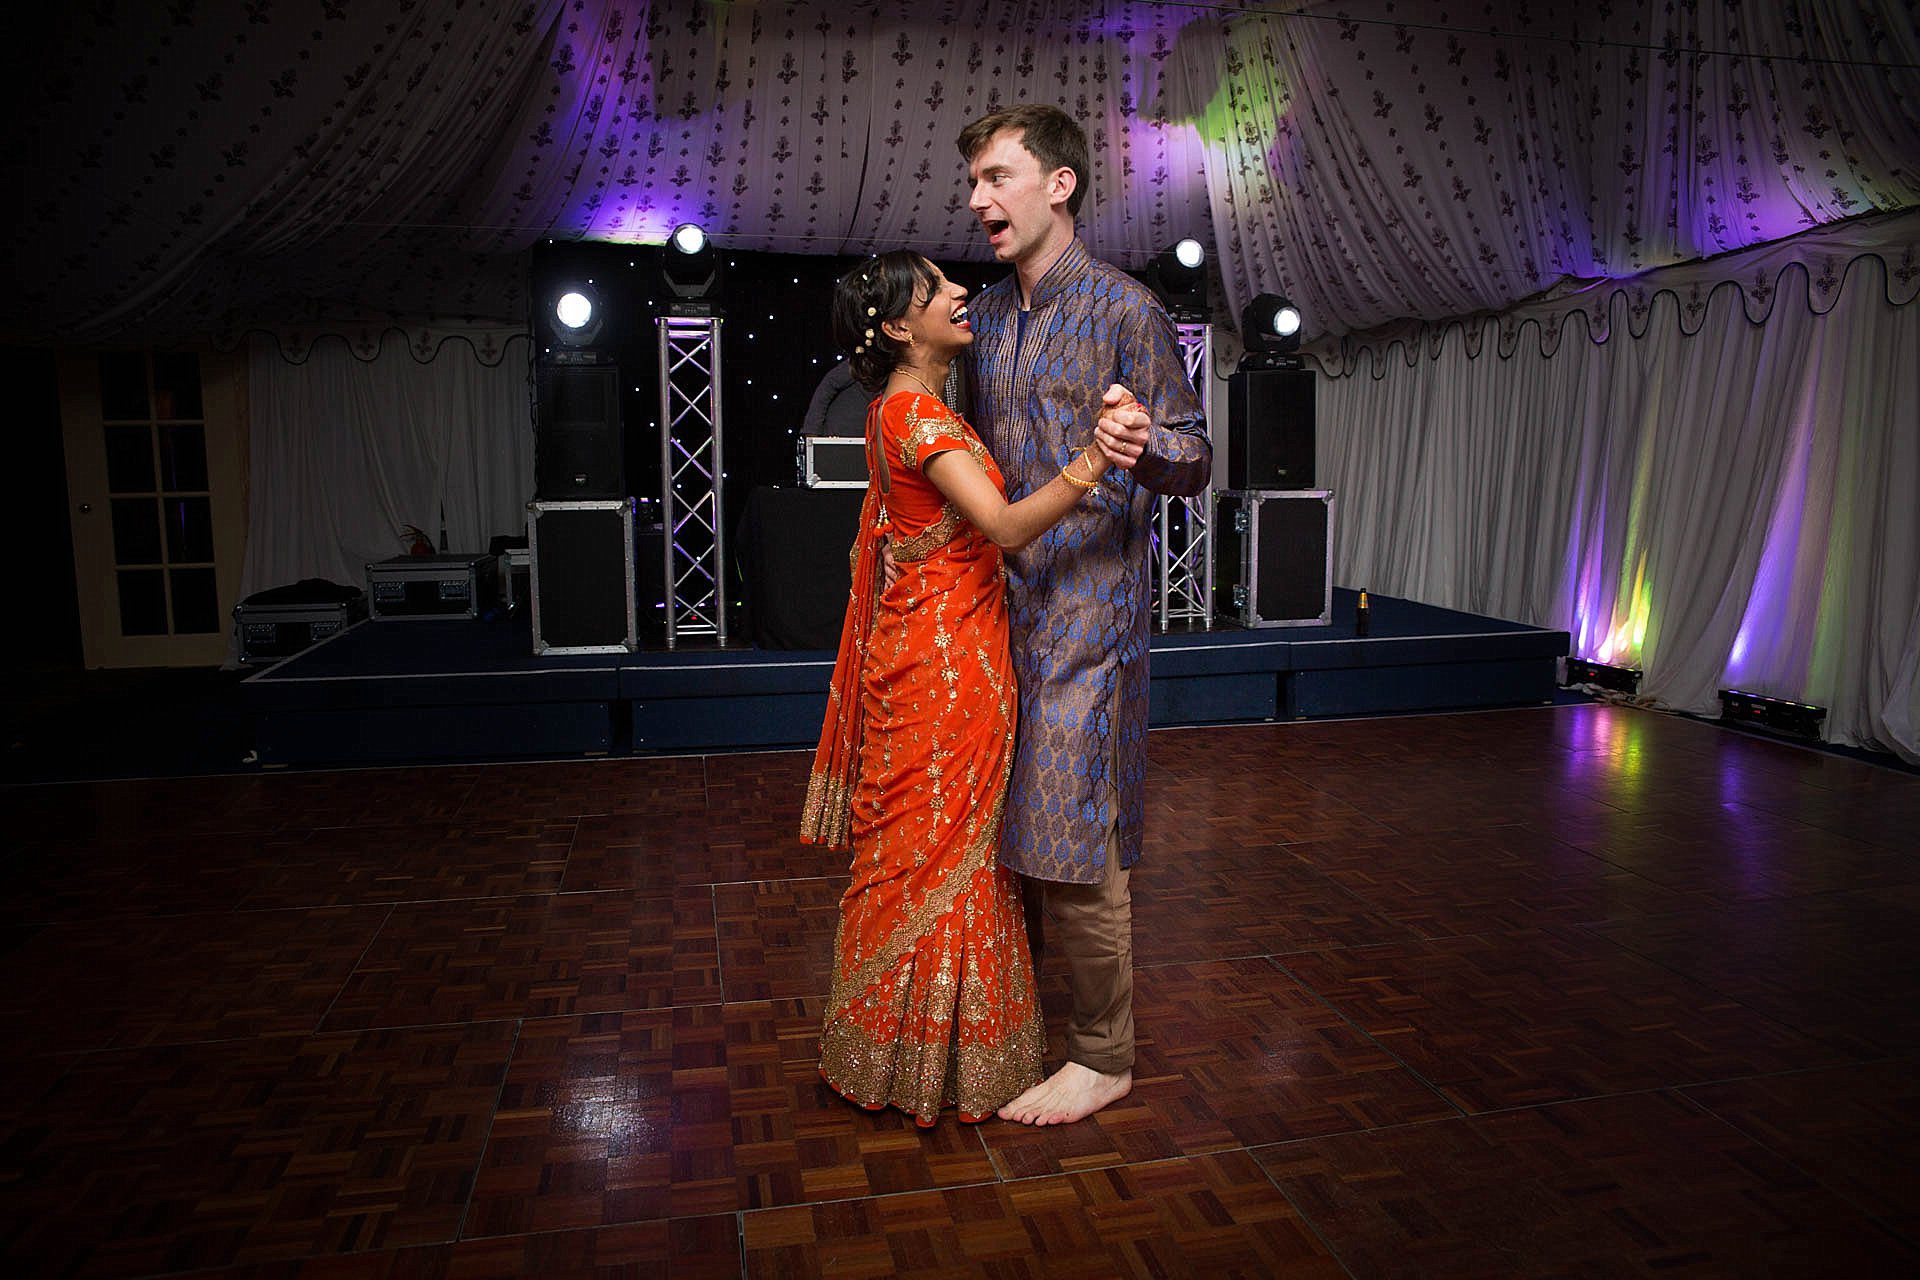 Nehal and Rob's first dance